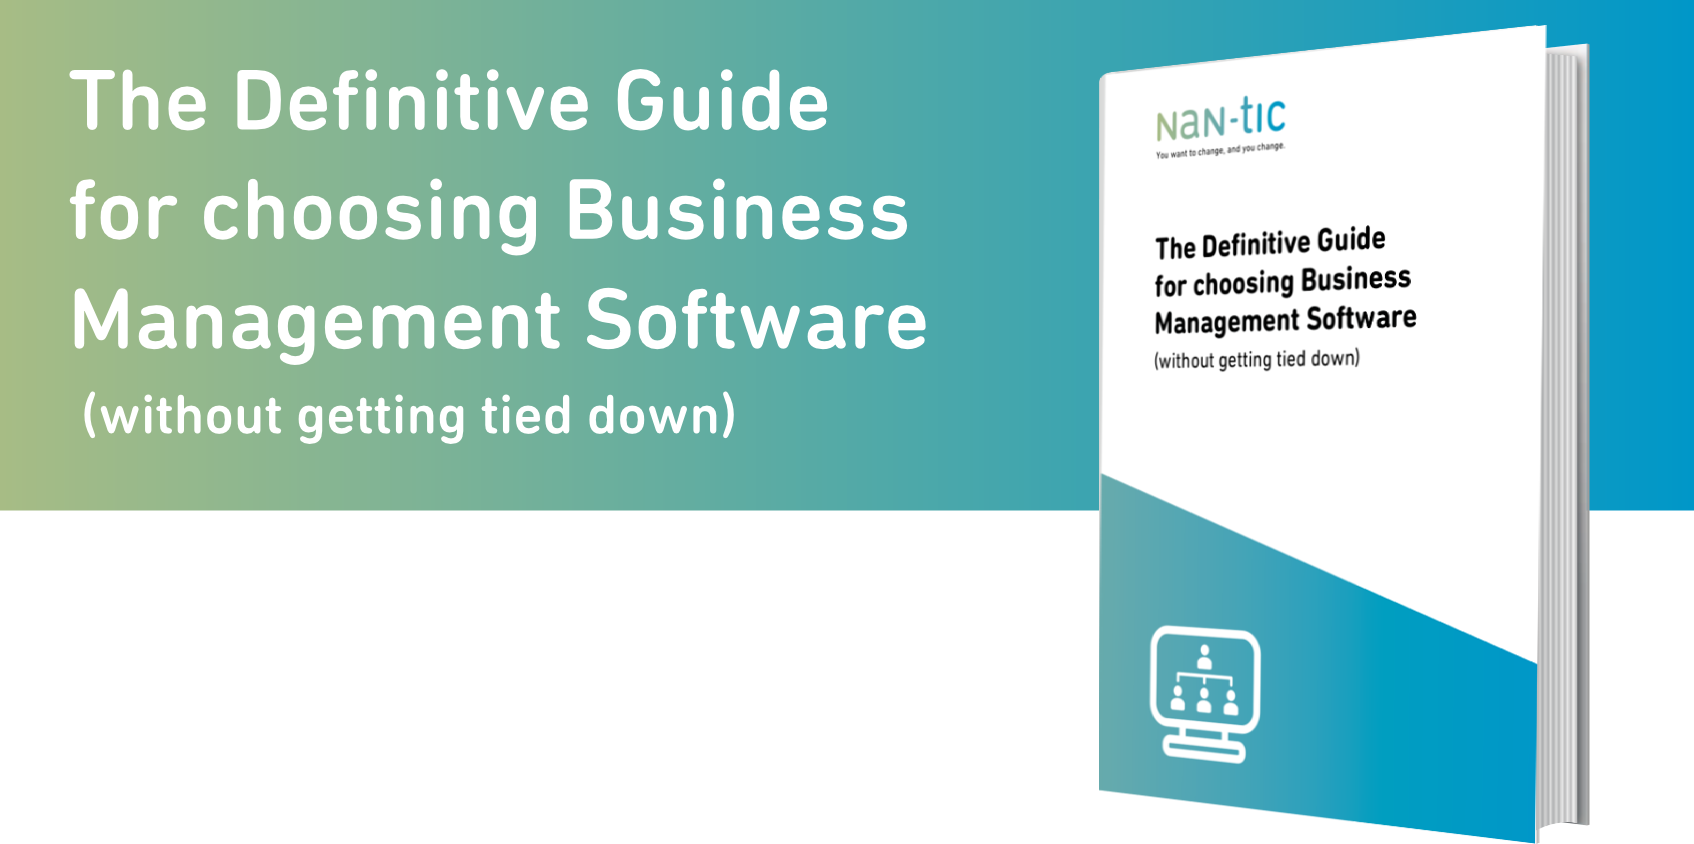 The Definitive Guide for Choosing Business Management Software